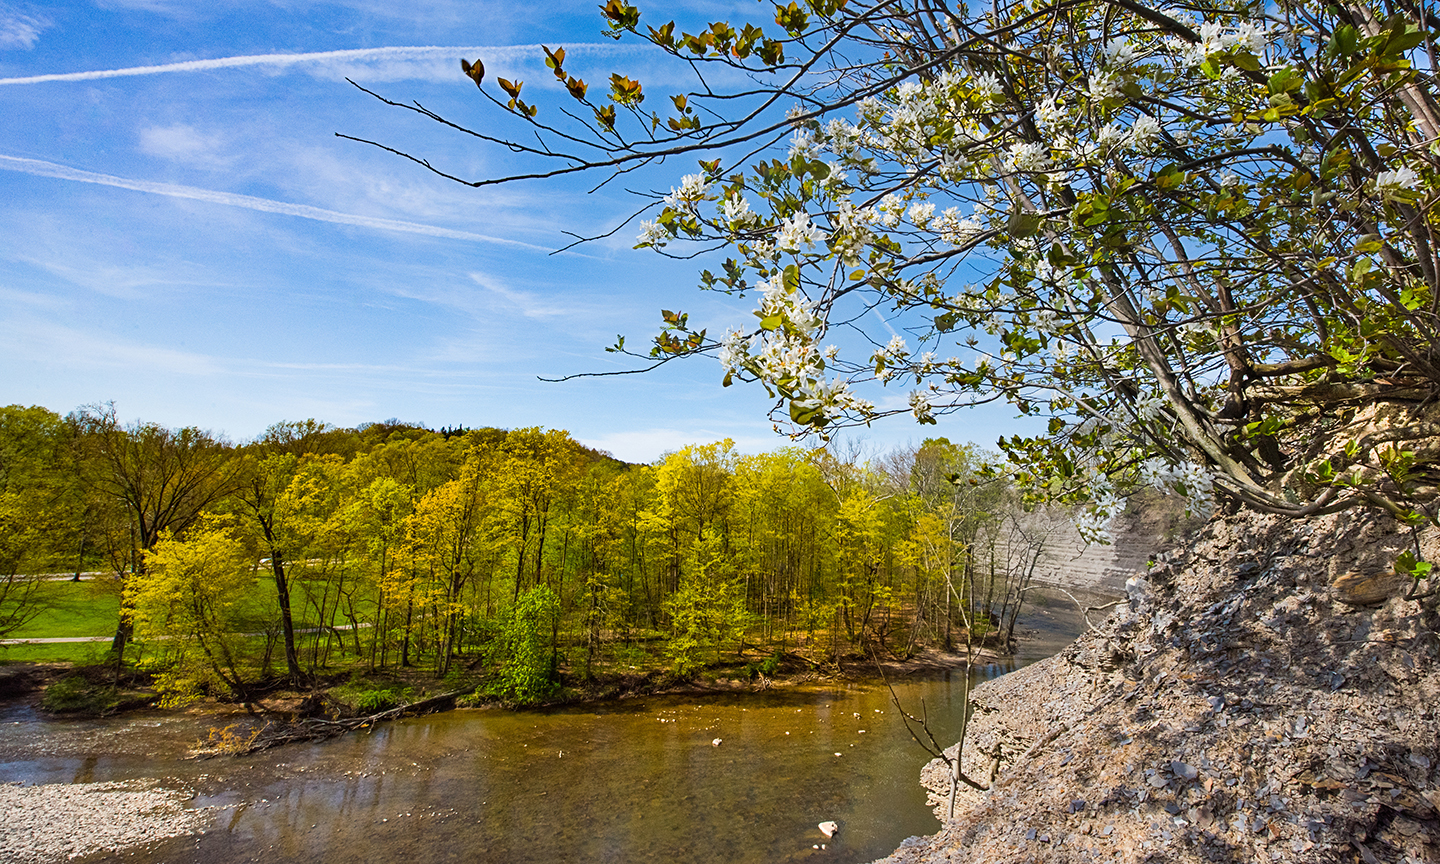 Cleveland Metroparks adds gems to Emerald Necklace by leveraging